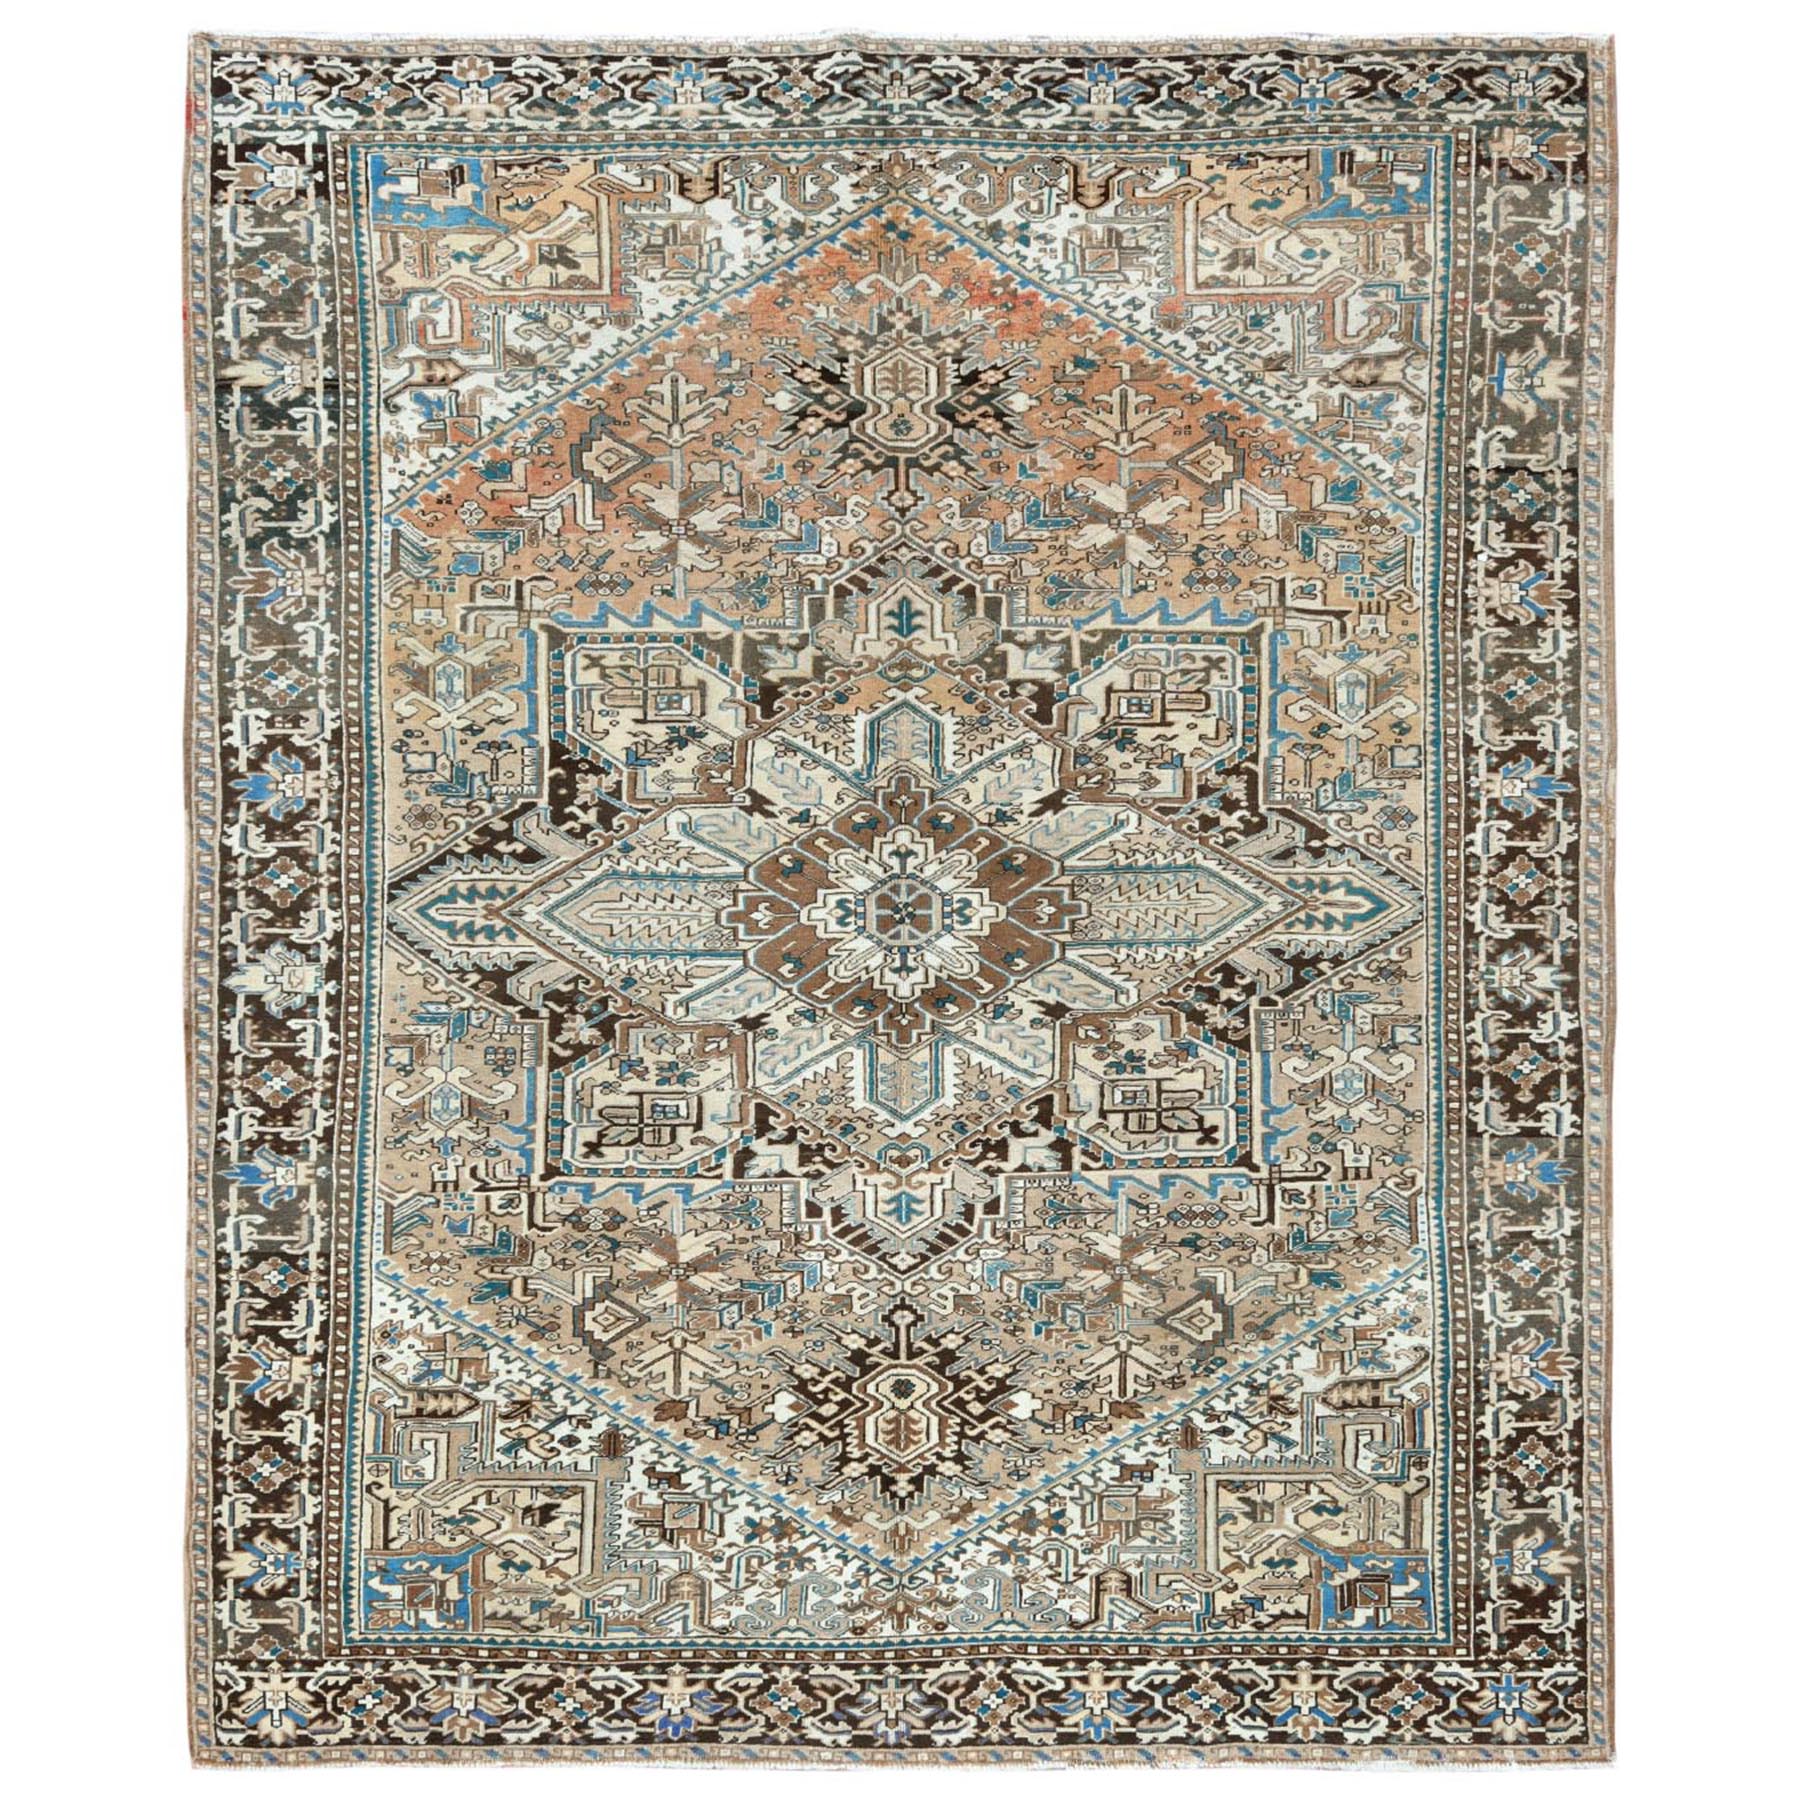  Wool Hand-Knotted Area Rug 10'3